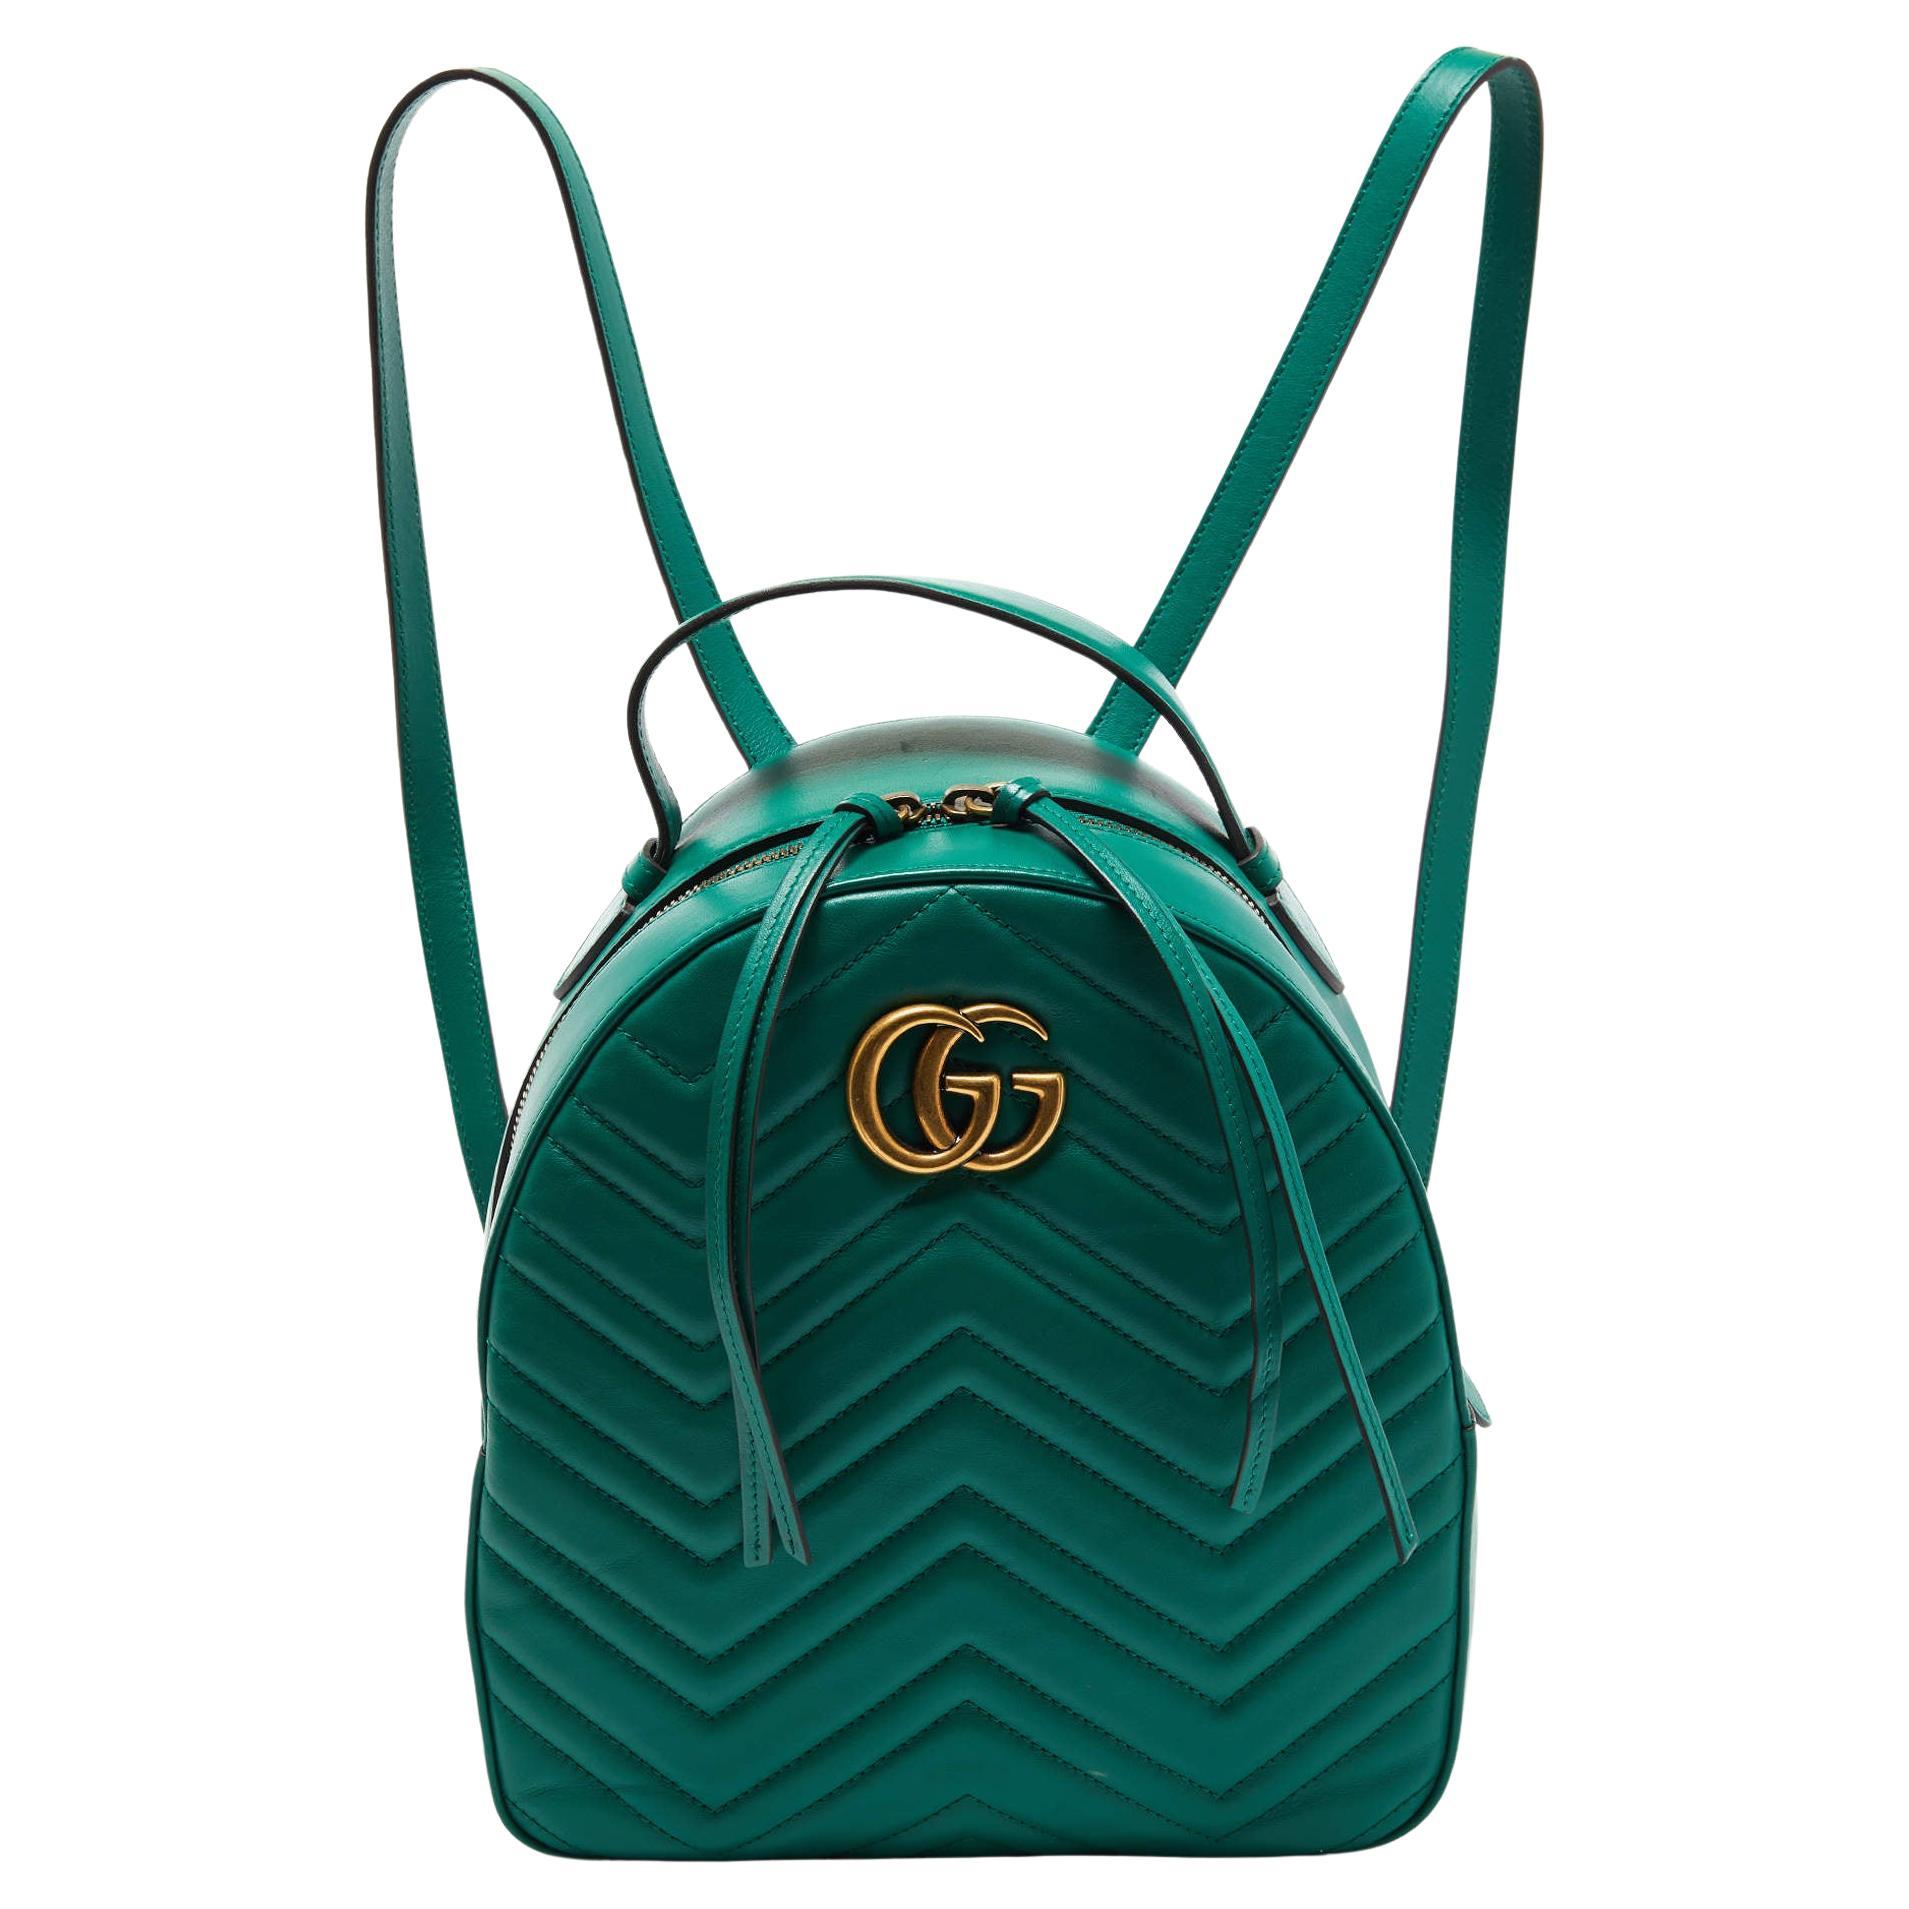 Gucci Green Matelassé Leather GG Marmont Backpack